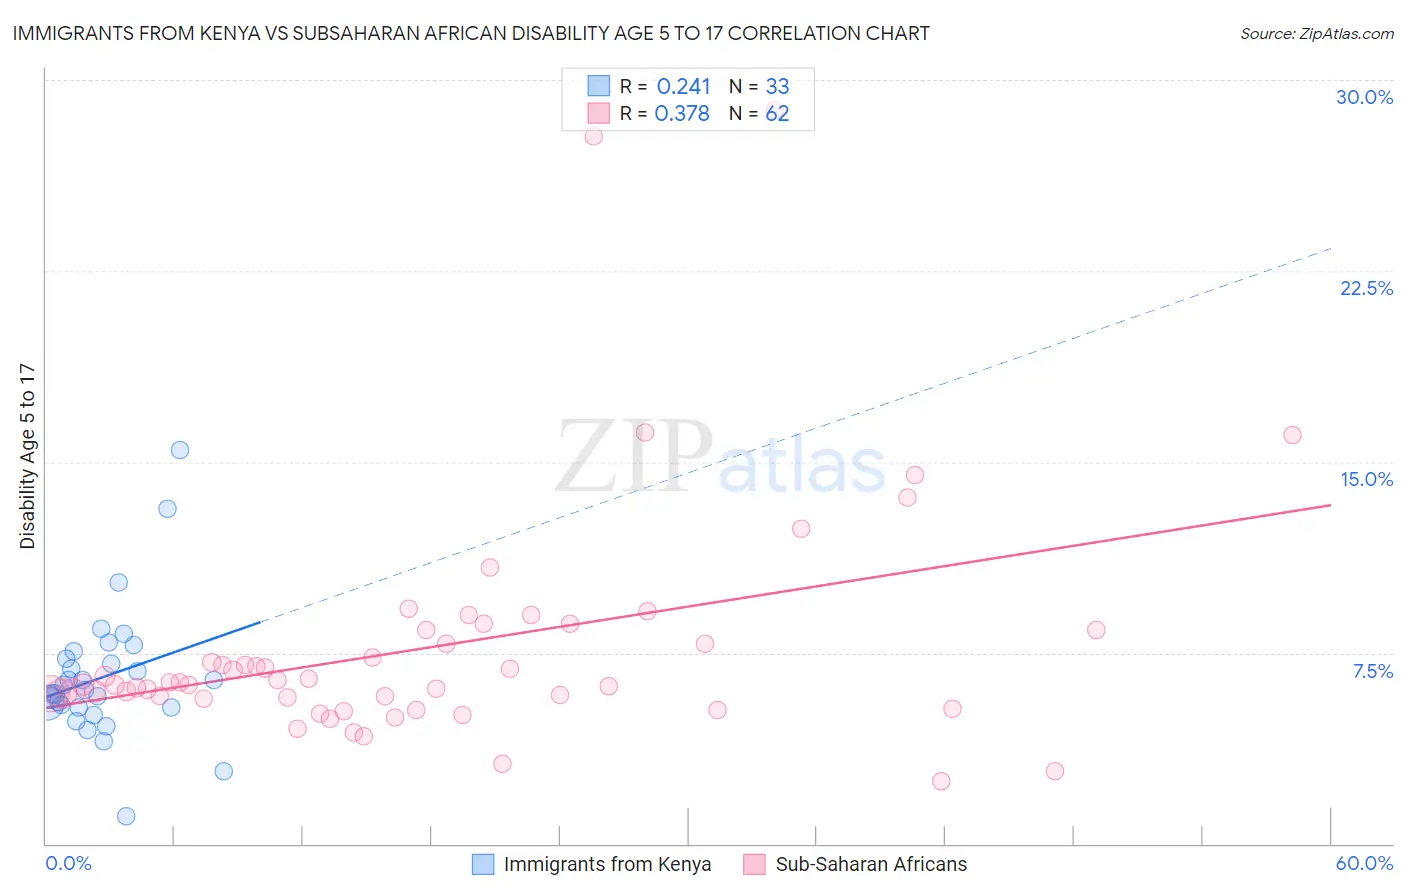 Immigrants from Kenya vs Subsaharan African Disability Age 5 to 17